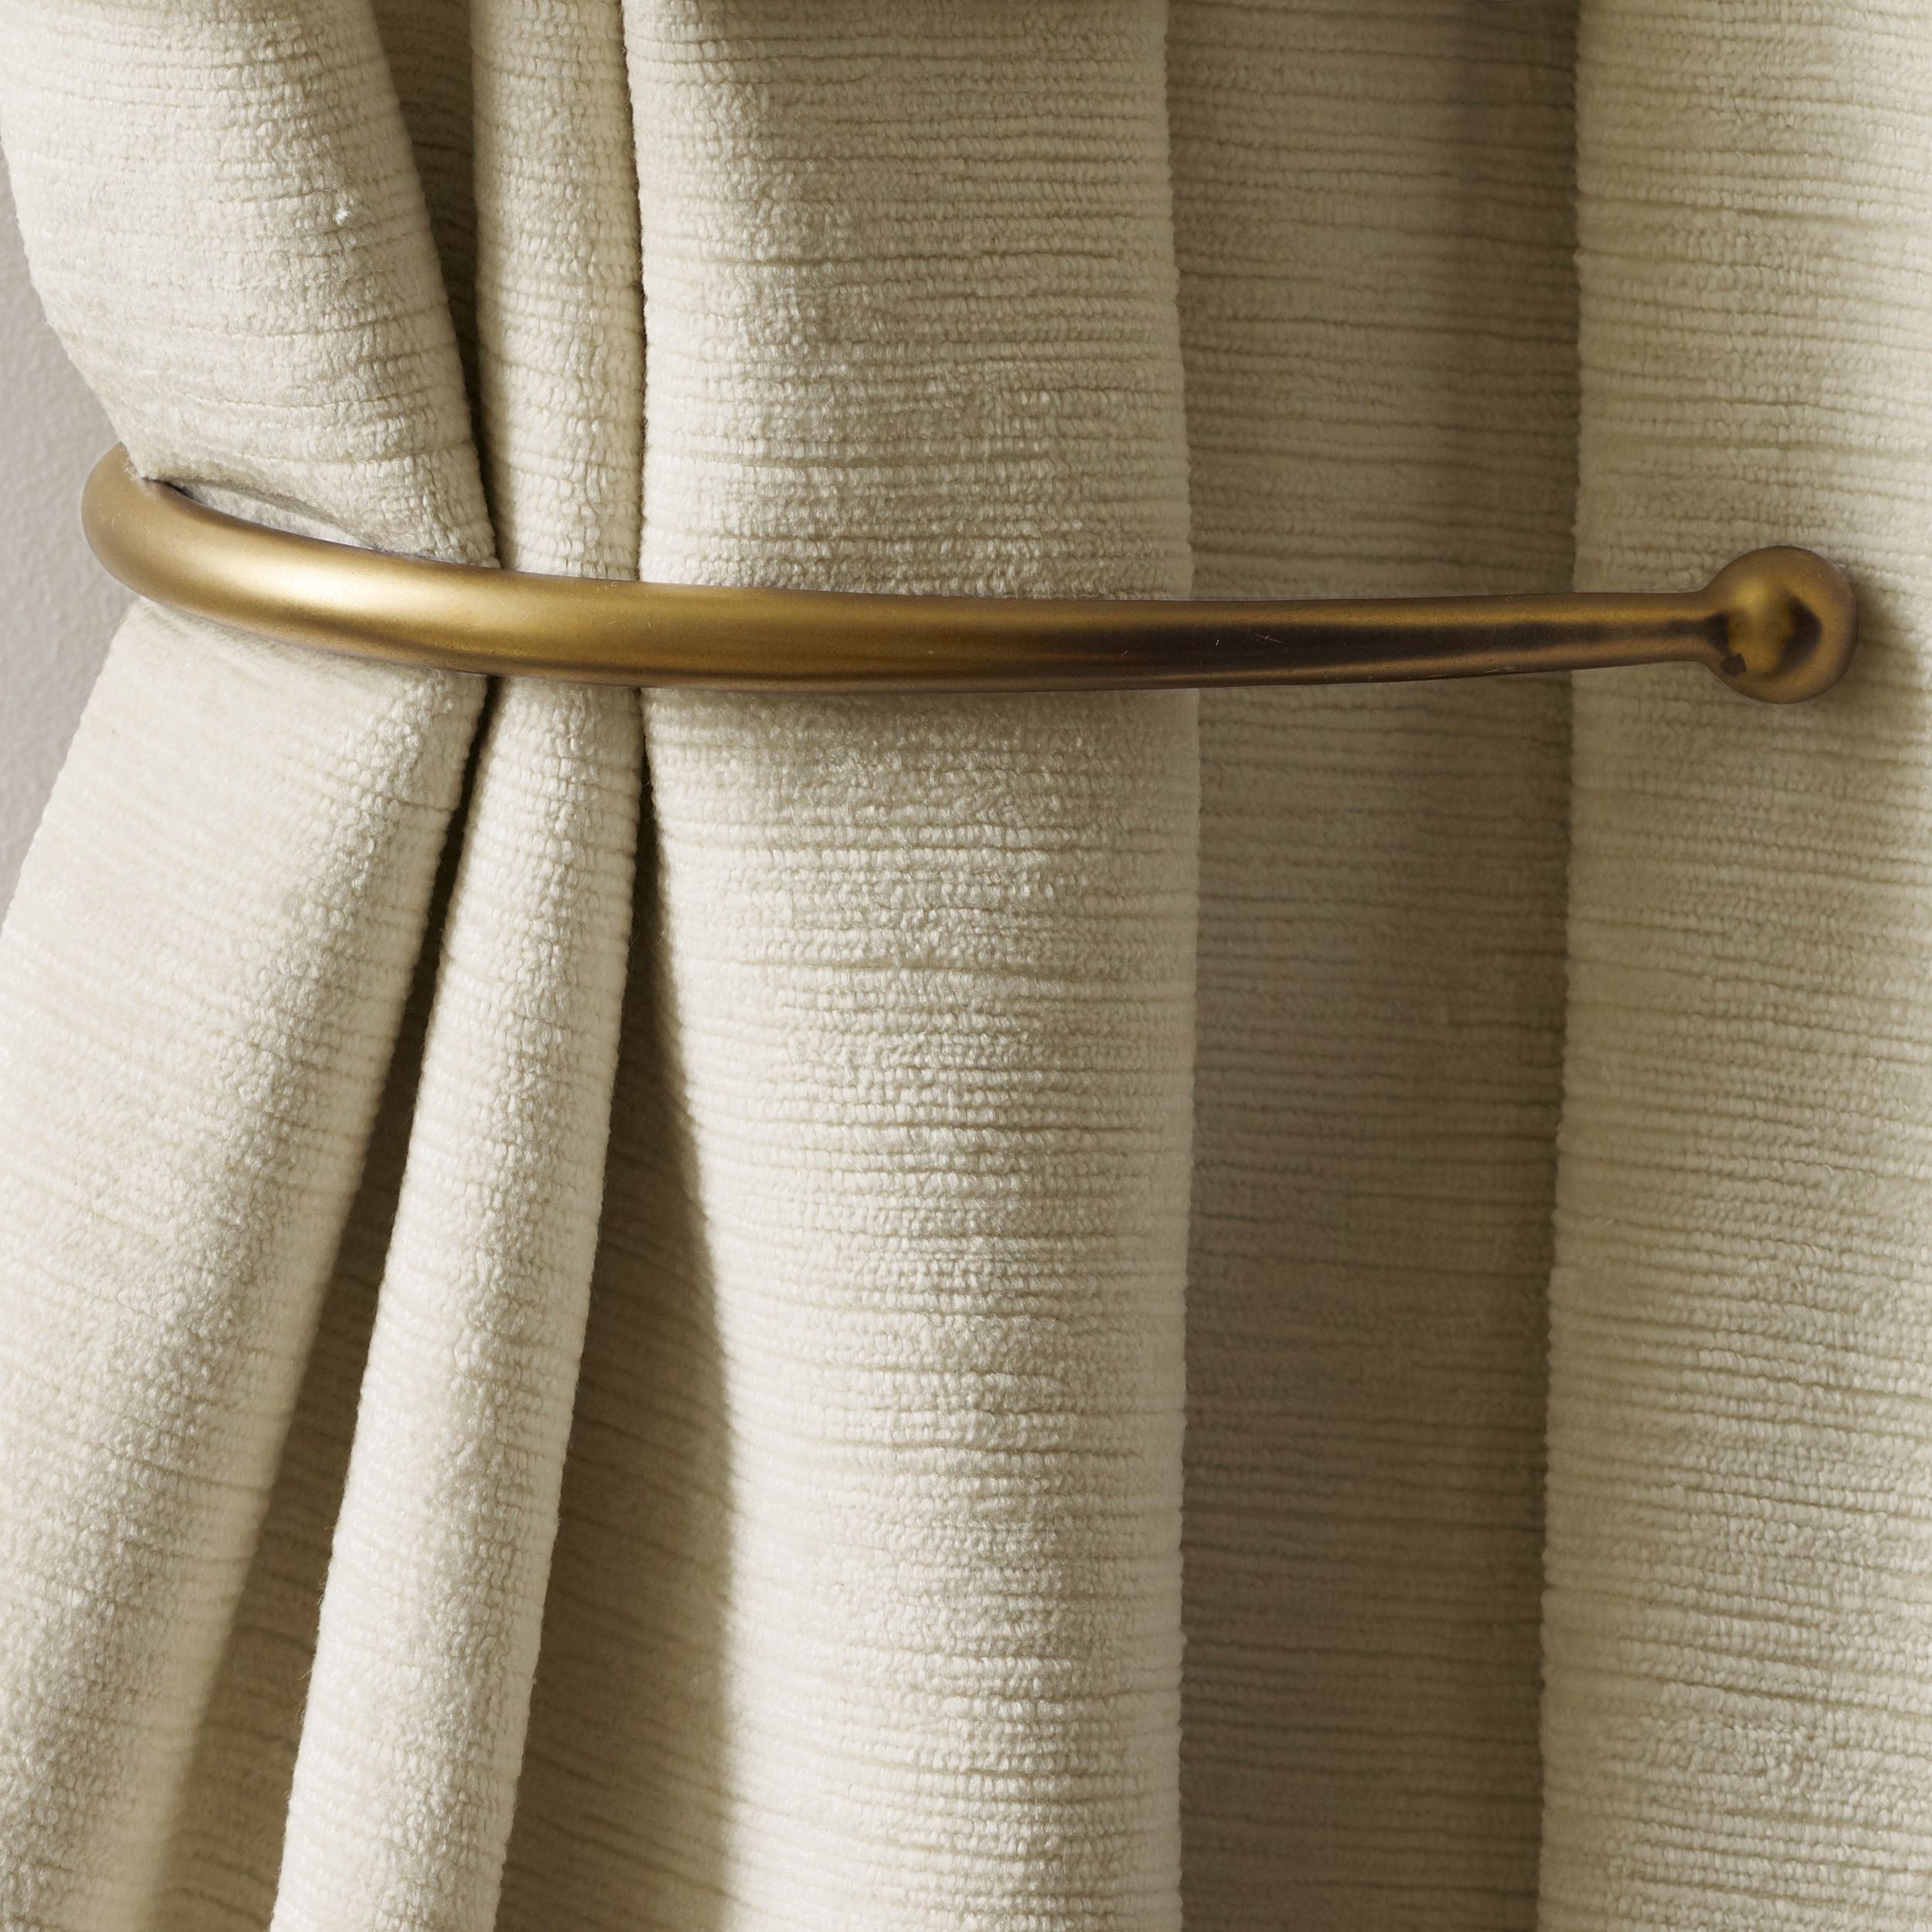 Wise use of decorative metal curtain
tie  backs